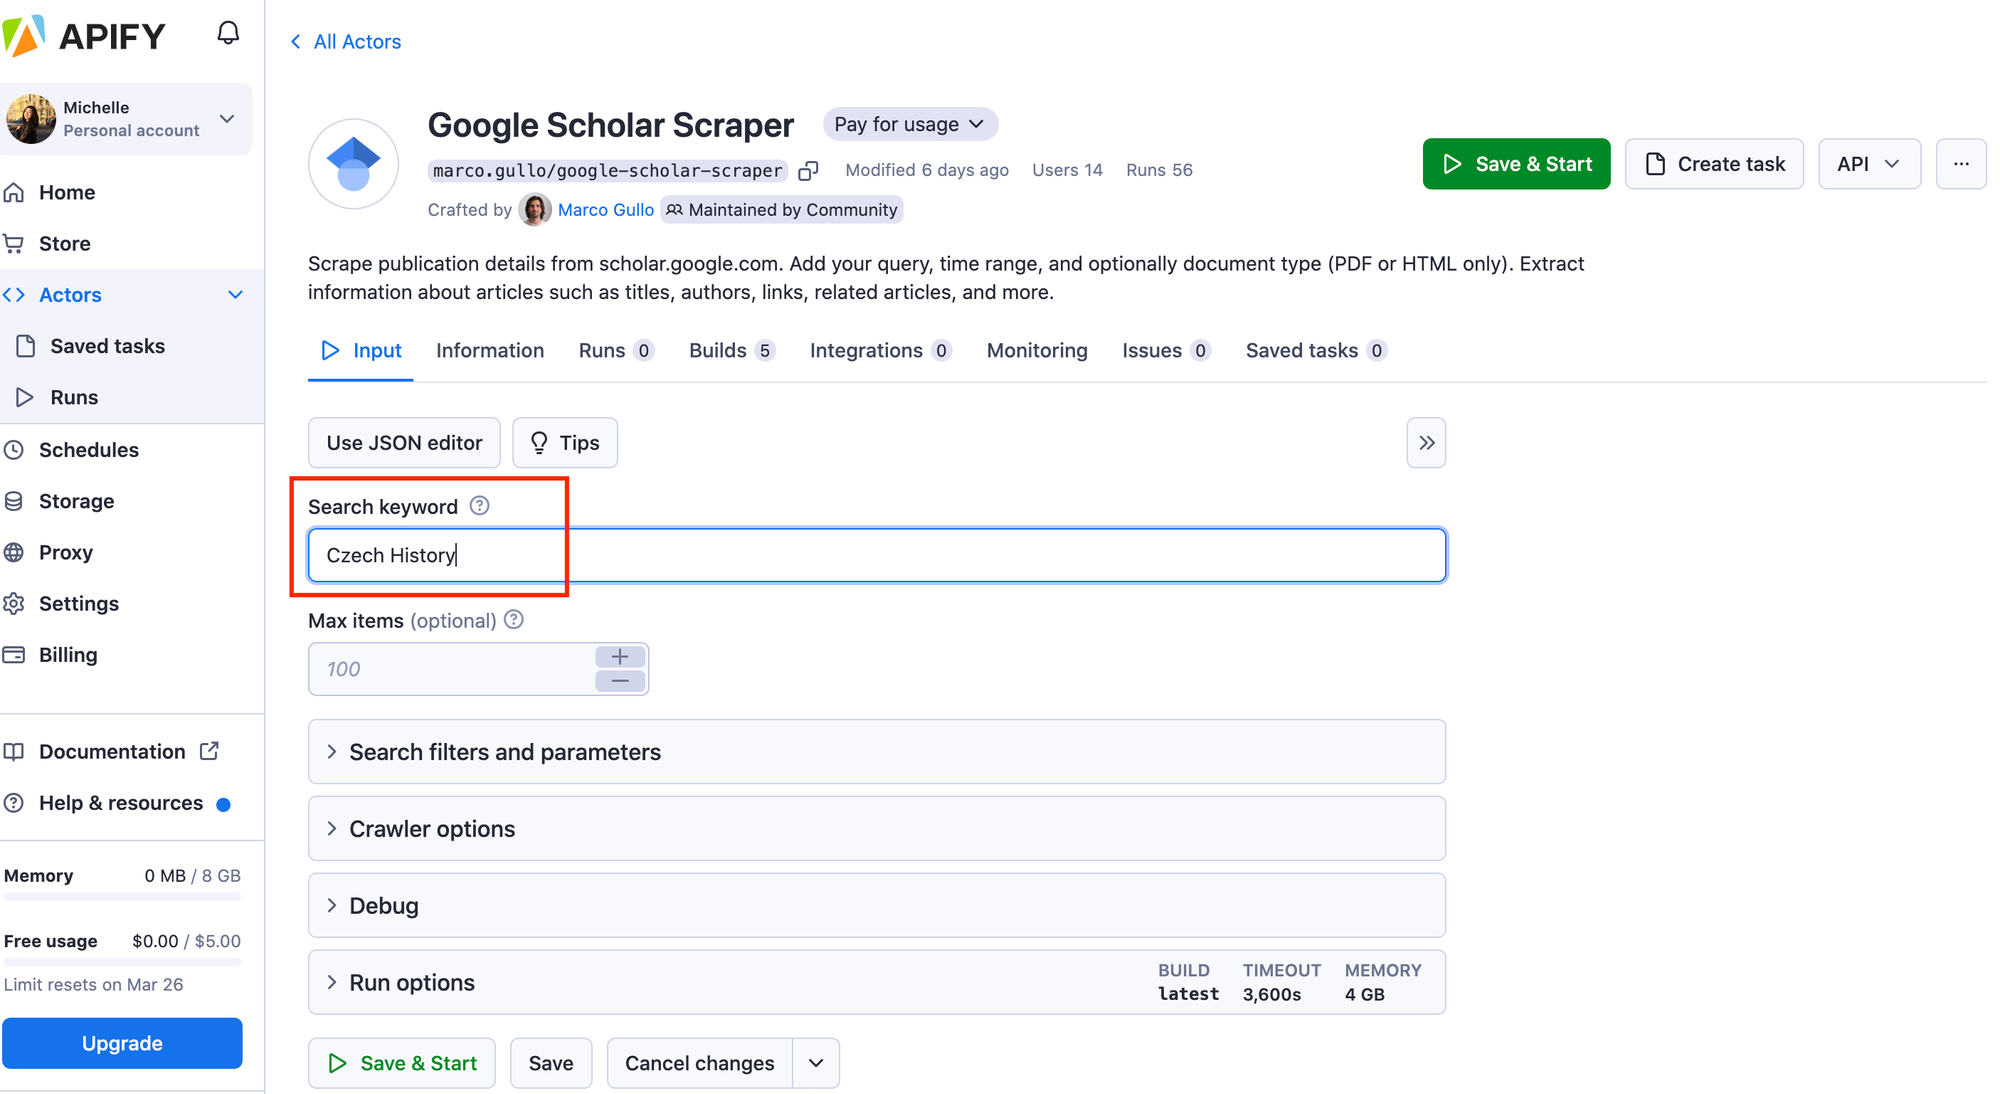 Enter the keyword associated with the resources you wish to scrape within the Google Scholar database